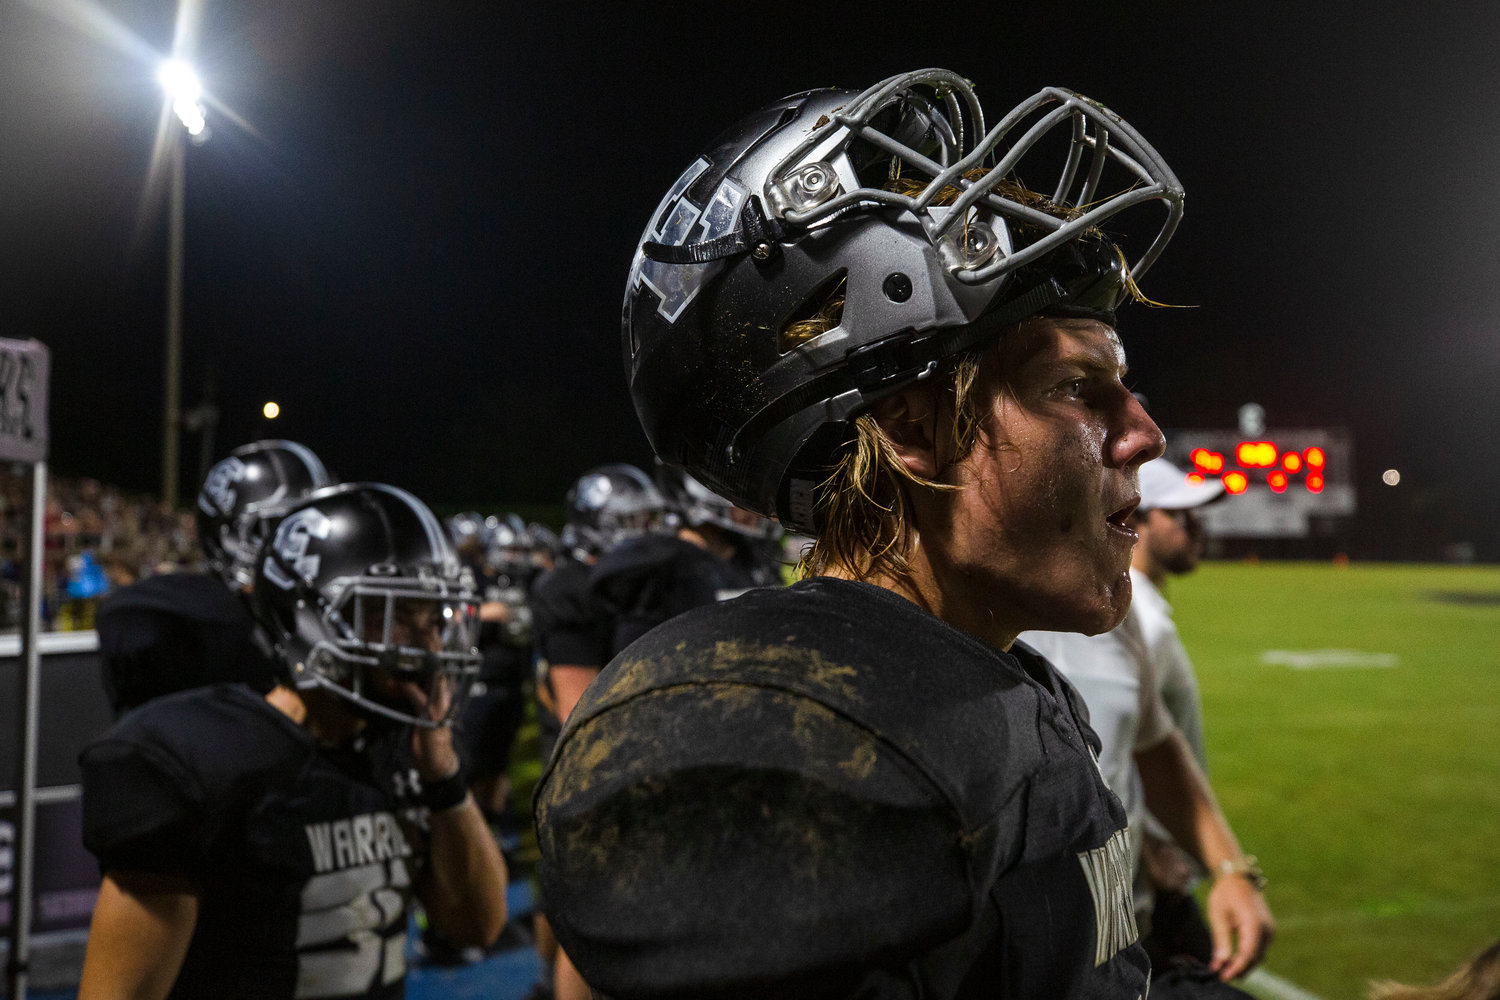 Elberta's Holden Crook looks on during the Warriors' season-opening game against Bayside Academy at home Aug. 19. Ahead of impending storms this Friday, Elberta's Week 4 home game was moved to Thursday, Sept. 8.